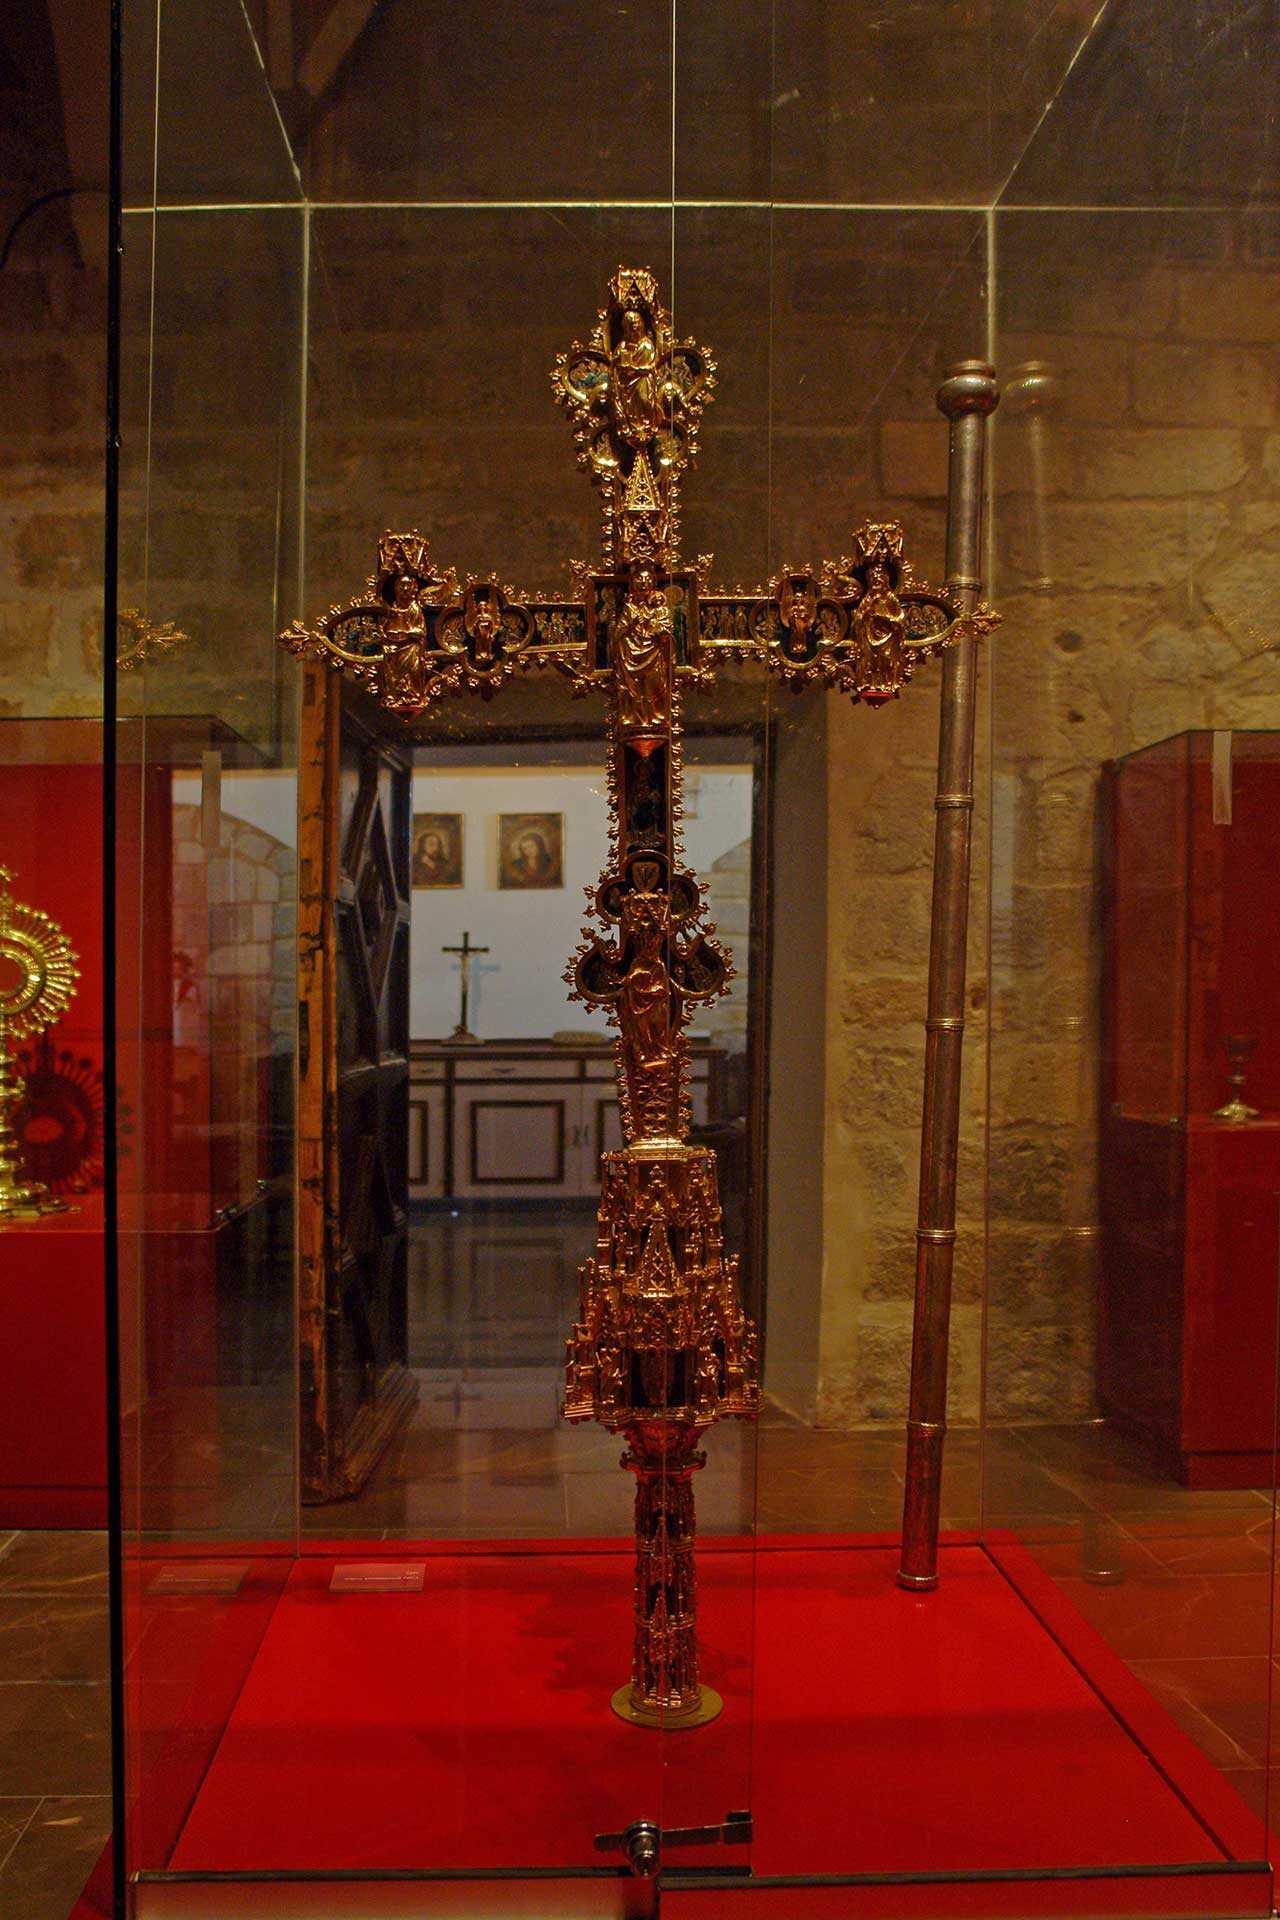 The Parish Museum Collection in Sant Mateu